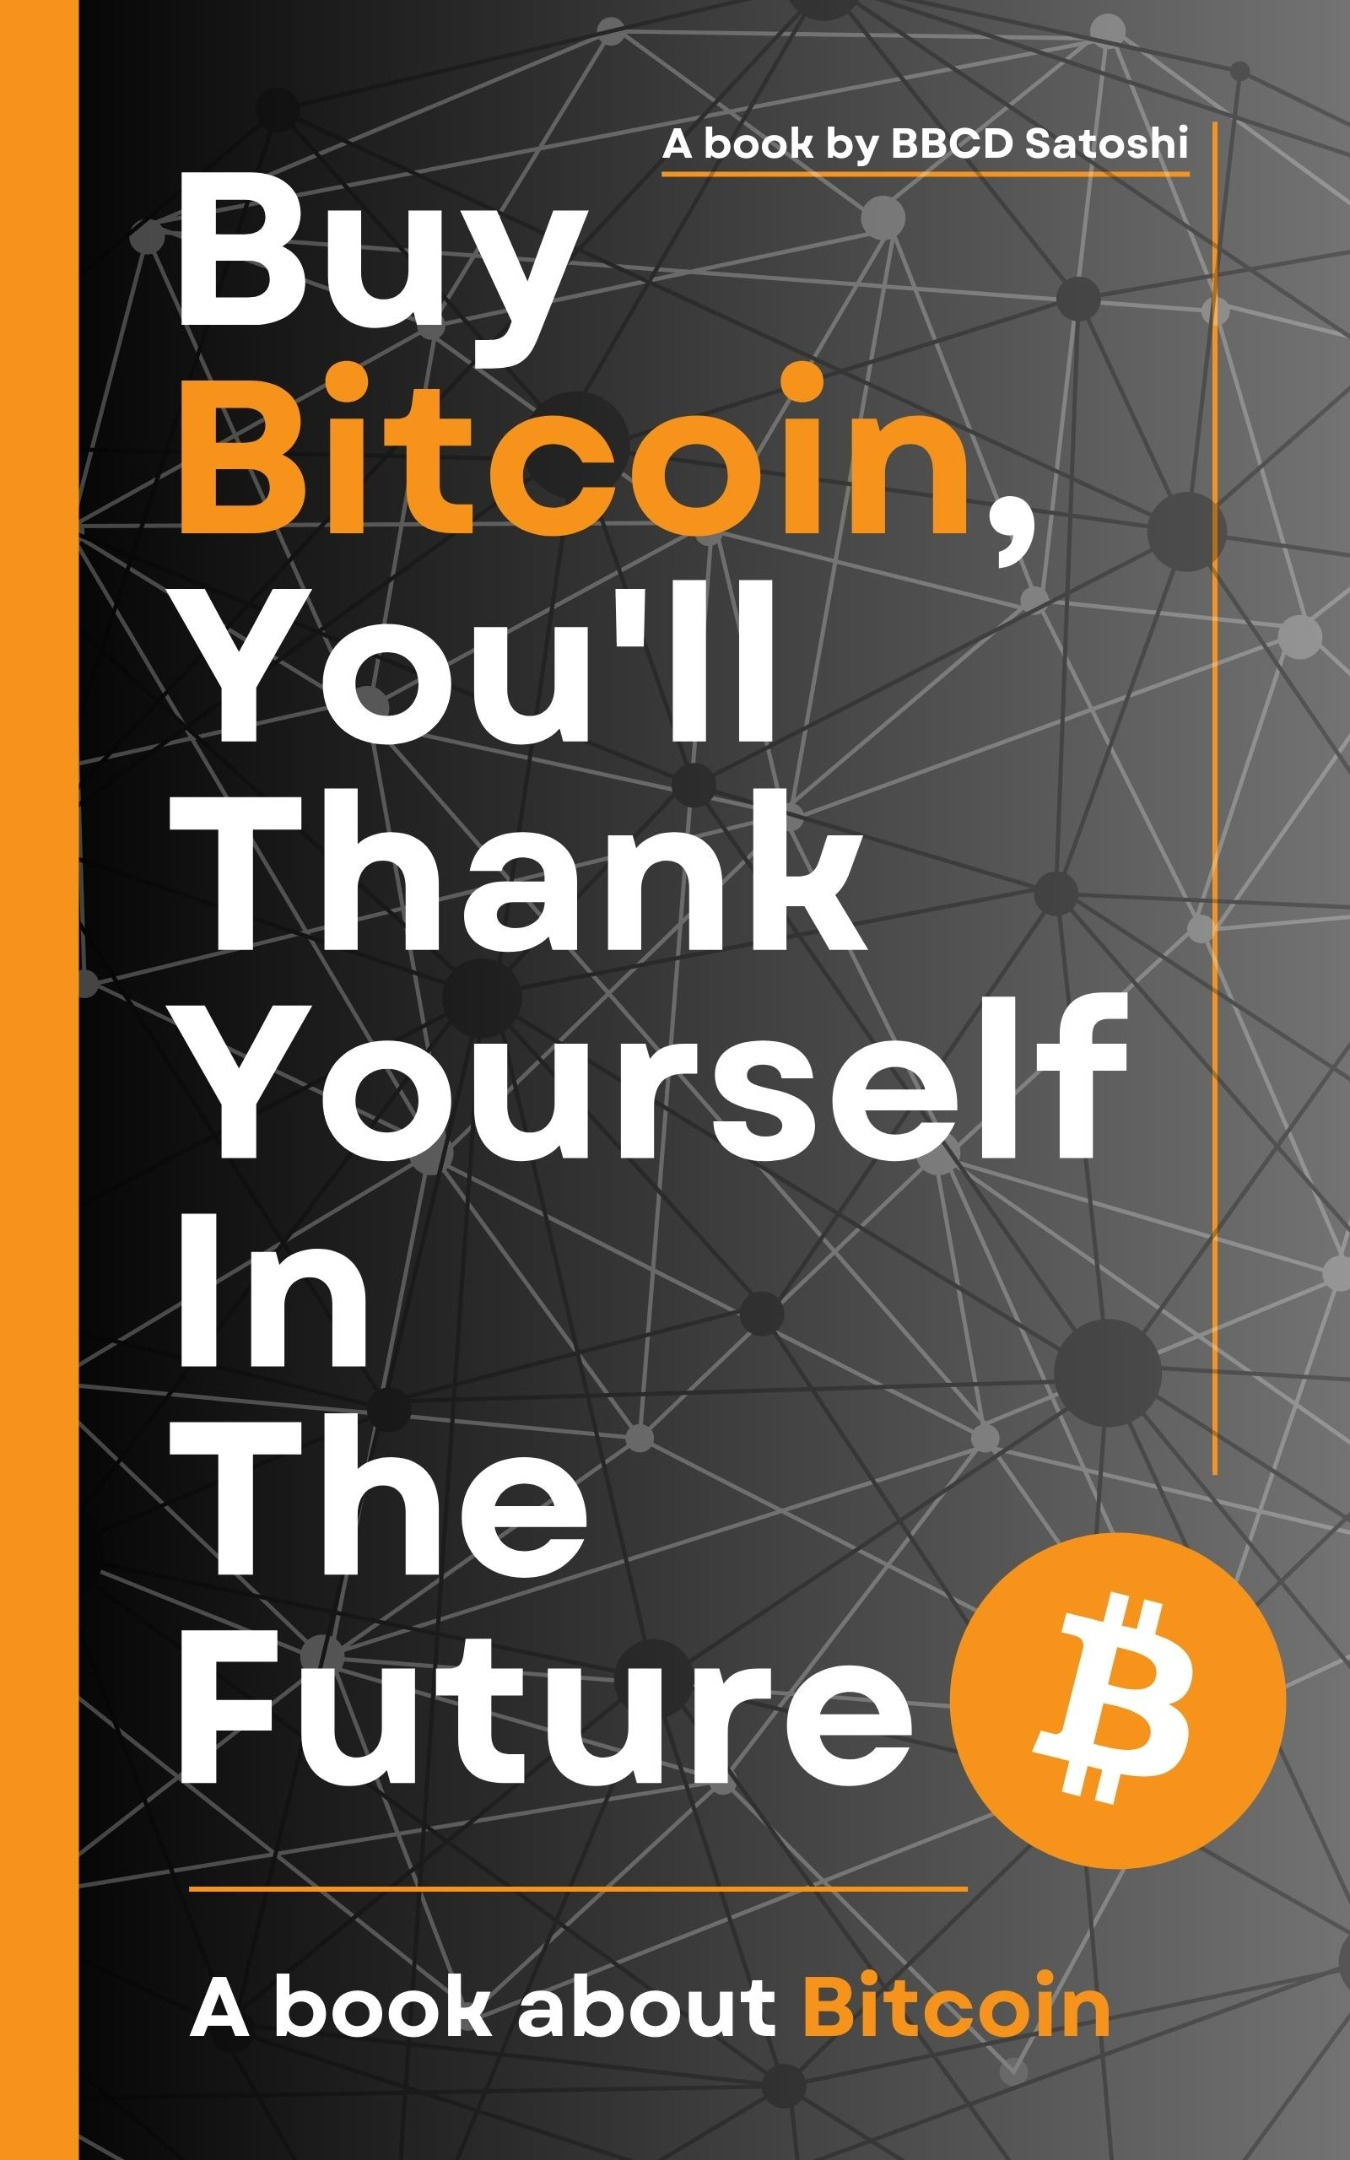 Buy Bitcoin, You'll Thank Yourself In The Future: A book about Bitcoin by BBCD Satoshi